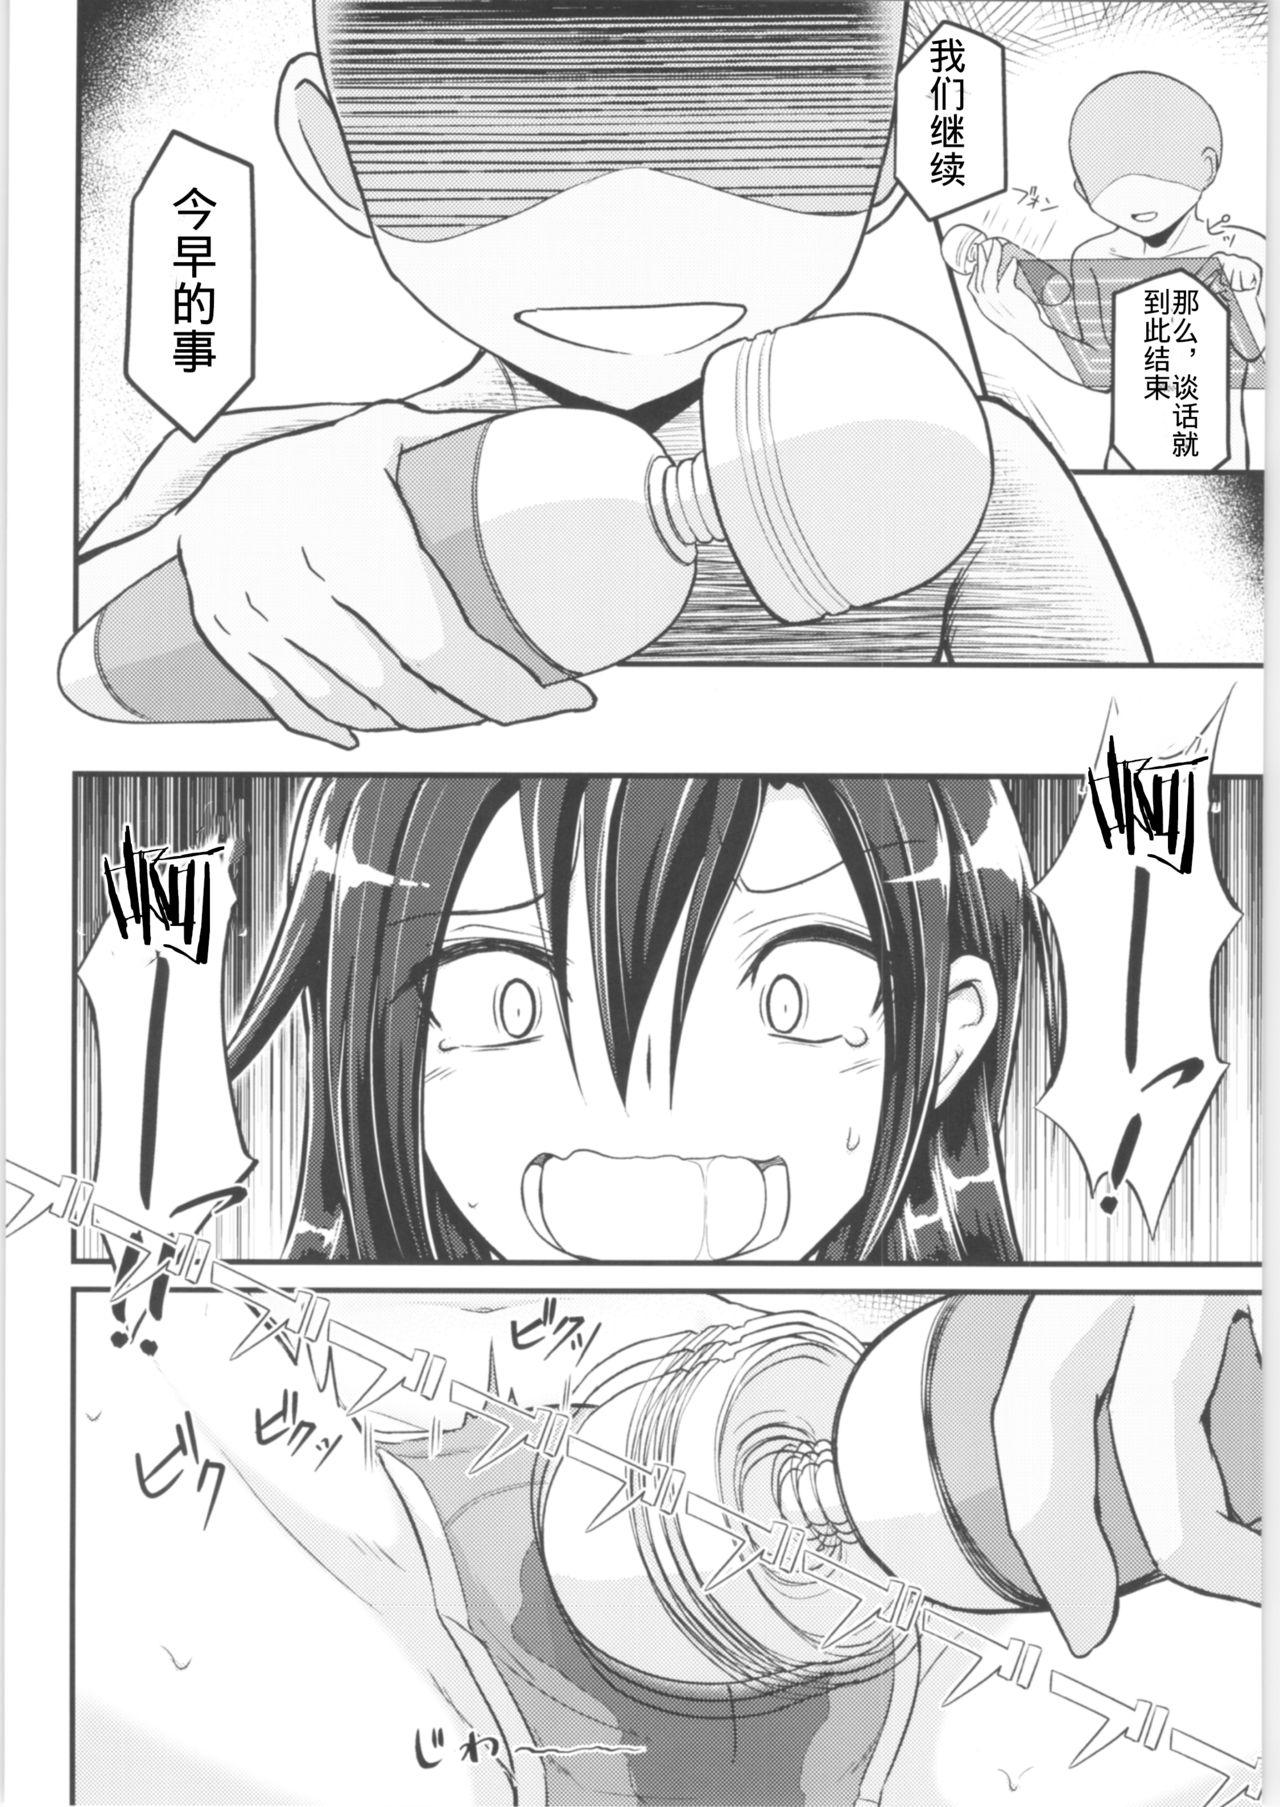 Gay Orgy Kiriko Route Another #01 - Sword art online Home - Page 9